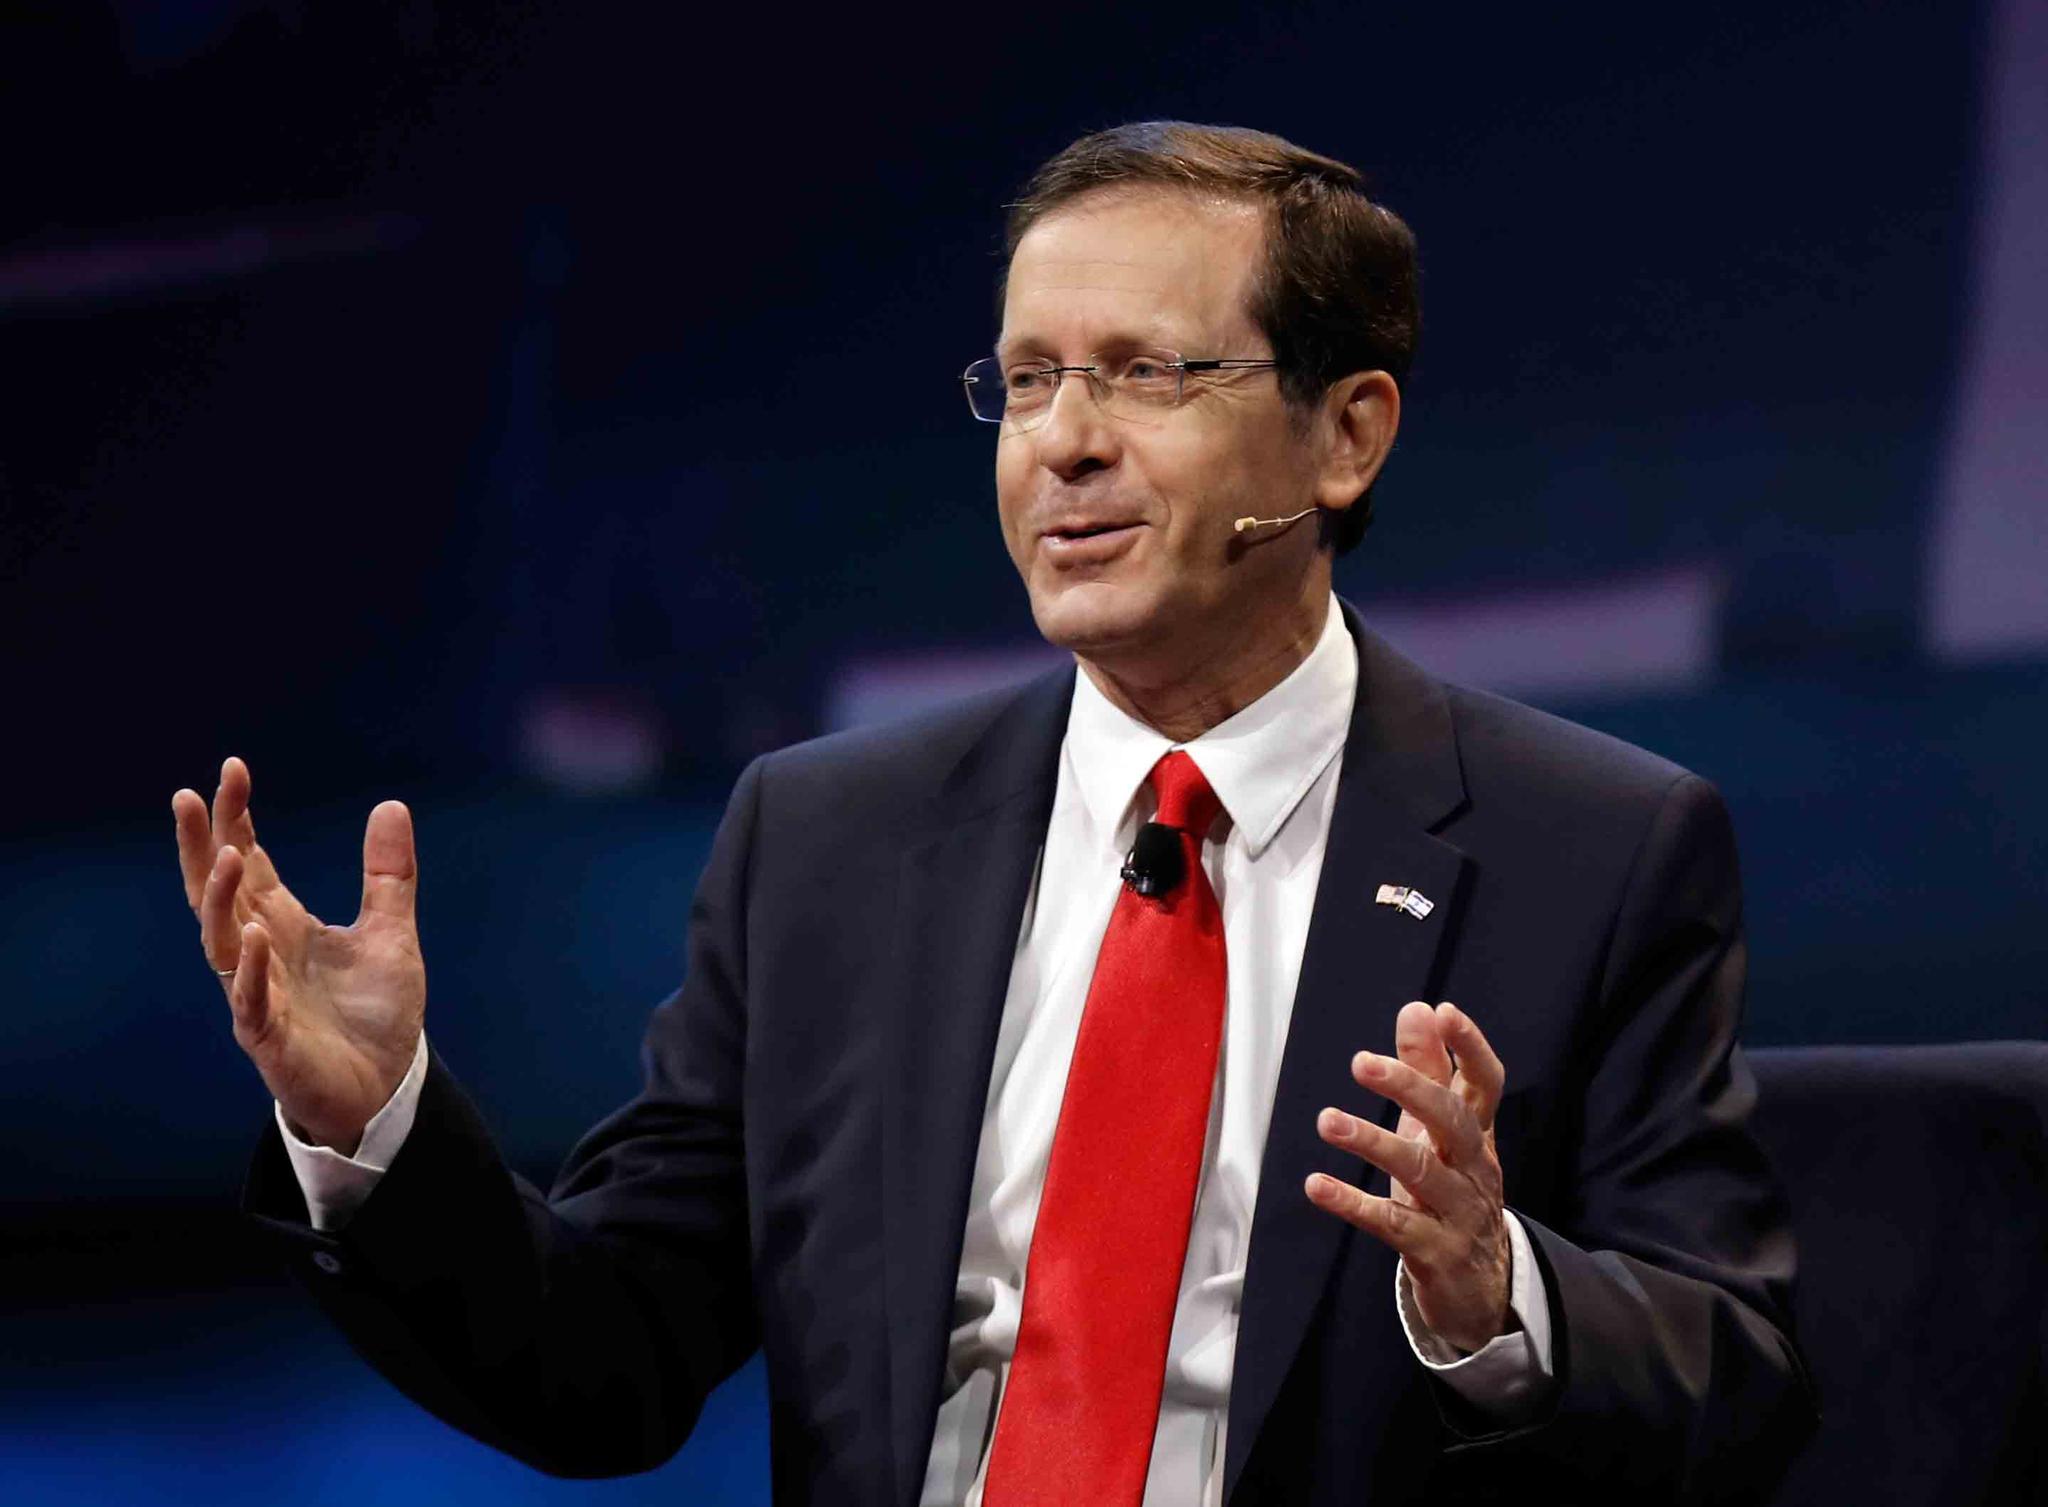 Isaac Herzog speaks at the AIPAC Policy Conference in Washington.